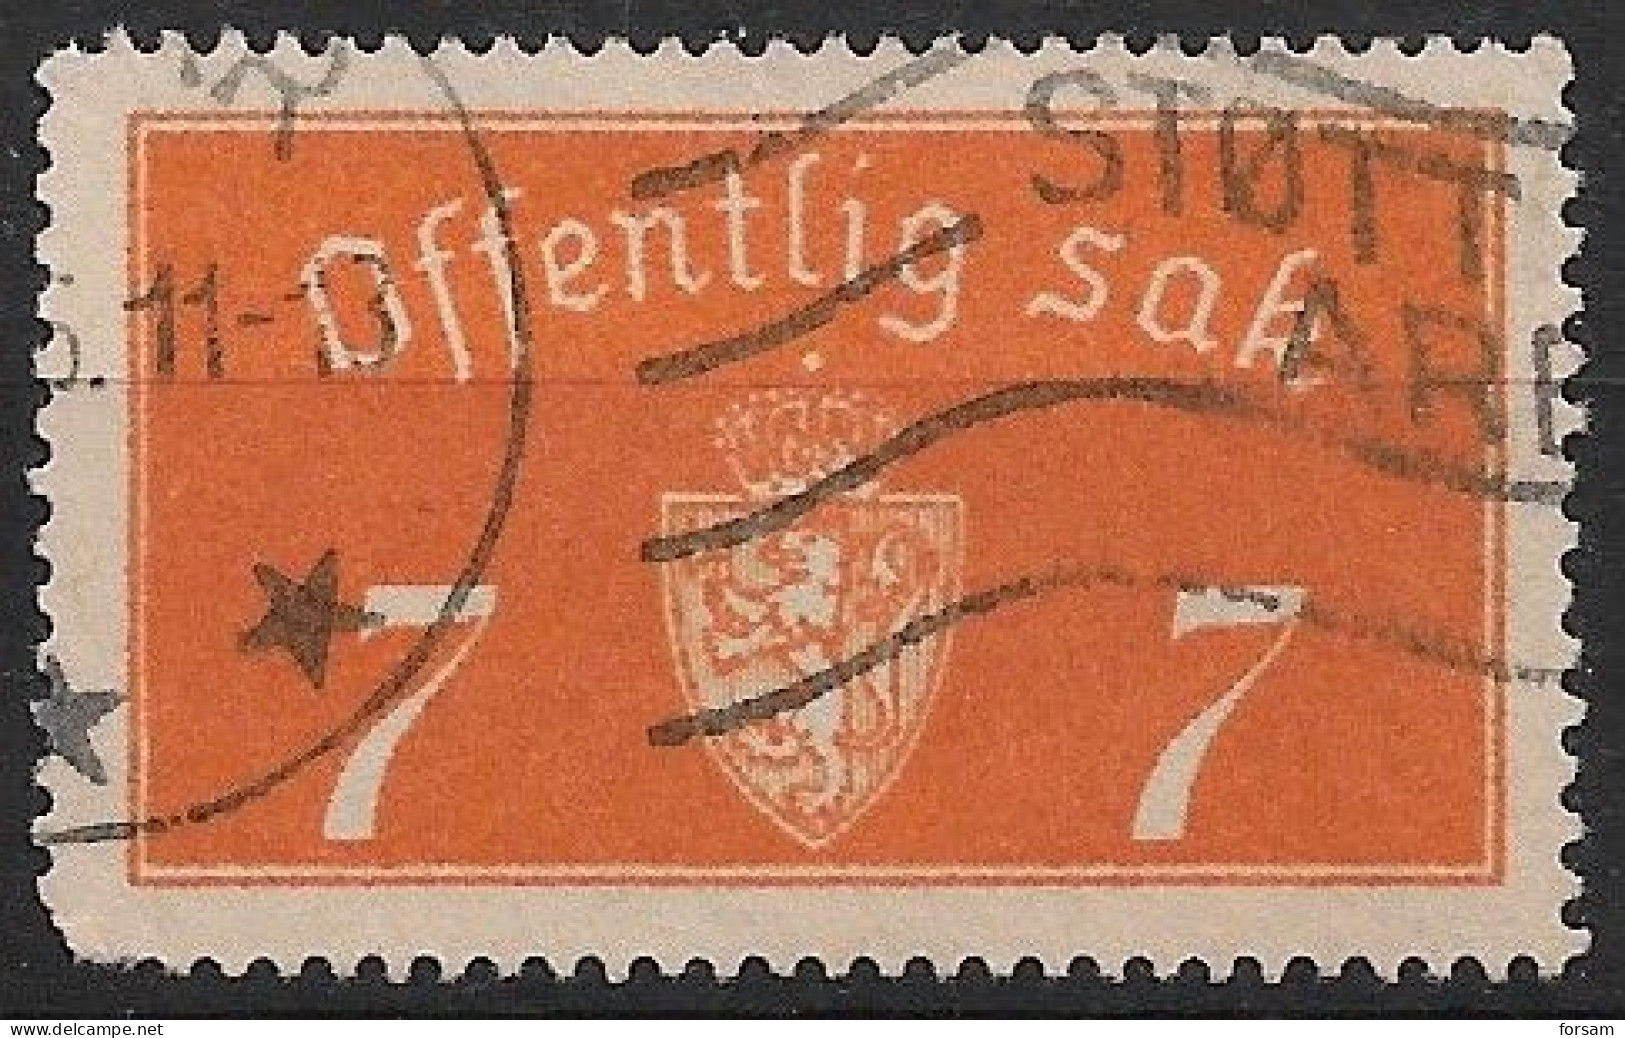 NORWAY..1933..MICHEL # 11 I..used. - Used Stamps